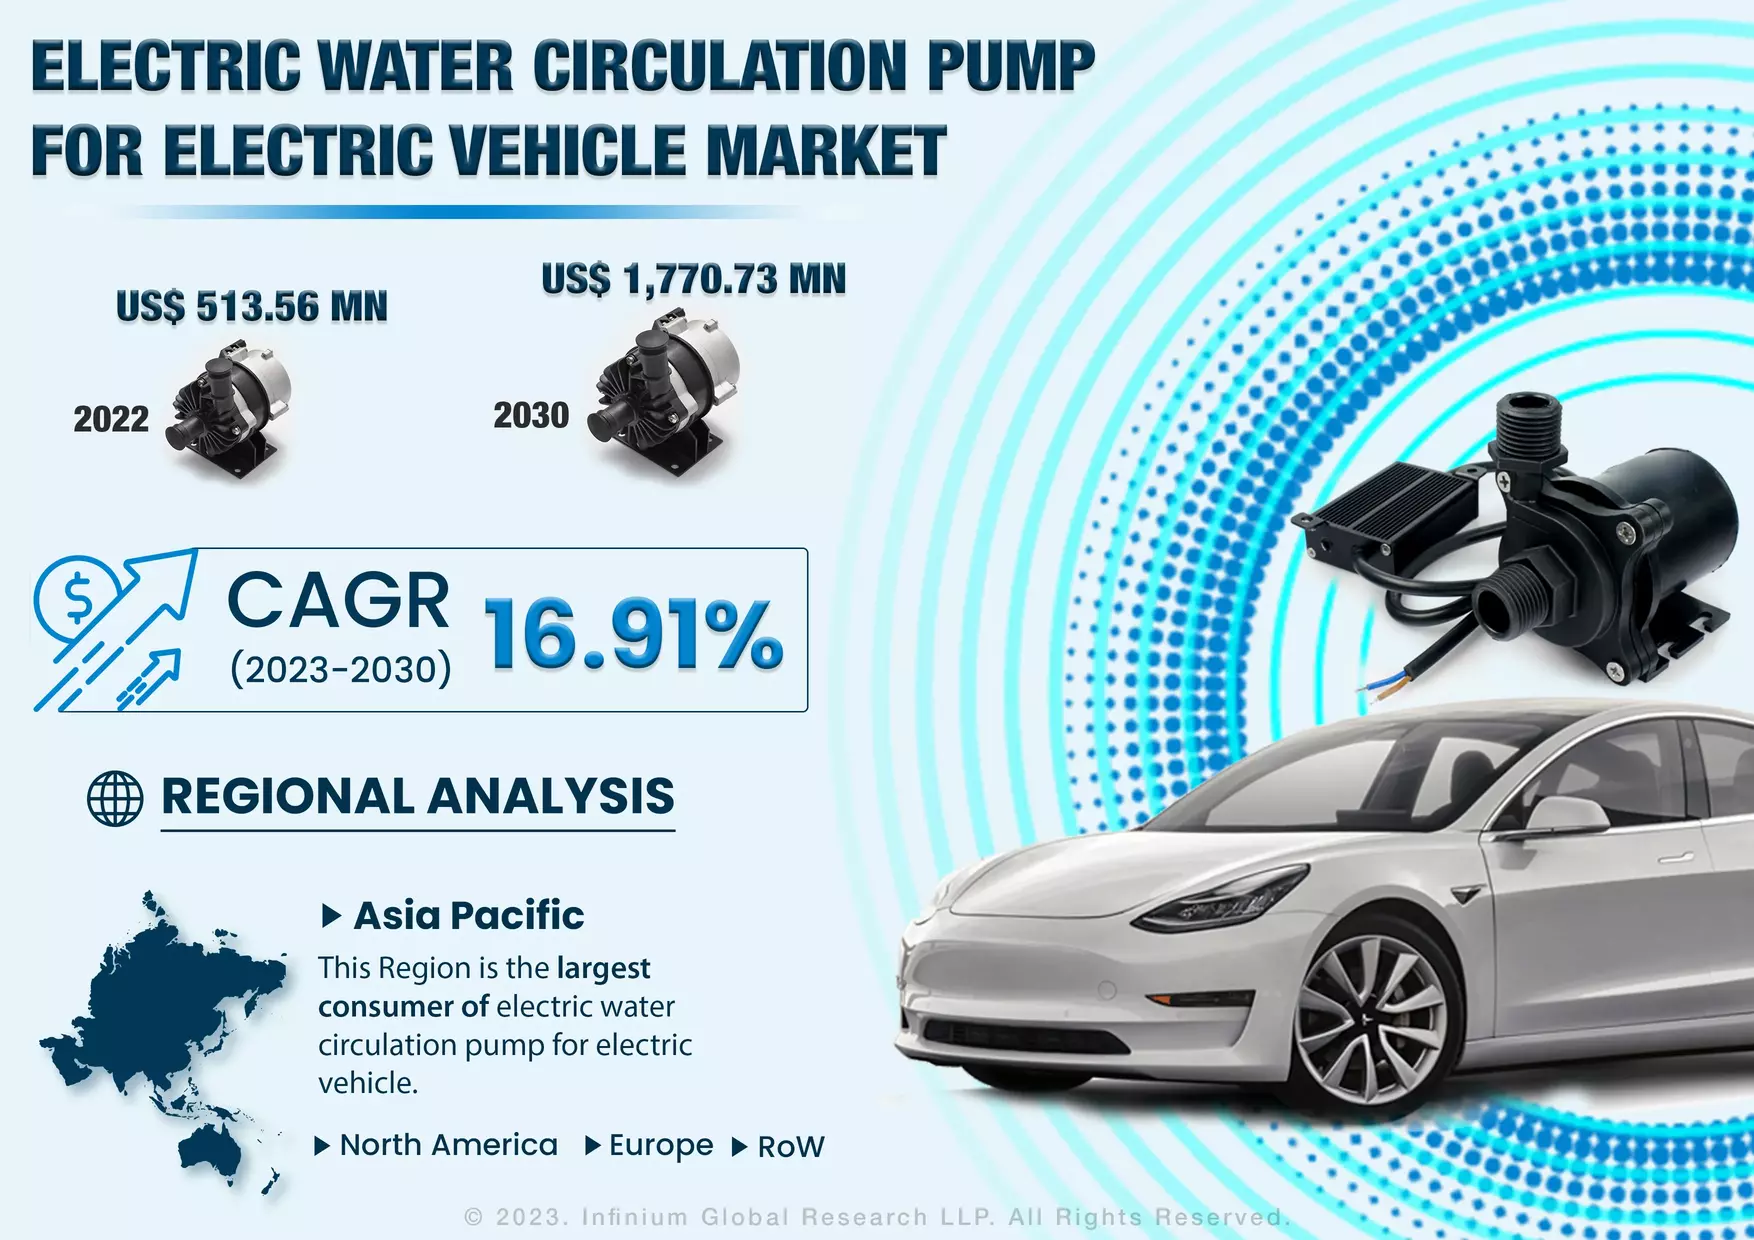 Infograph - Global Electric Water Circulation Pump for Electric Vehicle Market was Valued at 513.56 Million in 2022 and